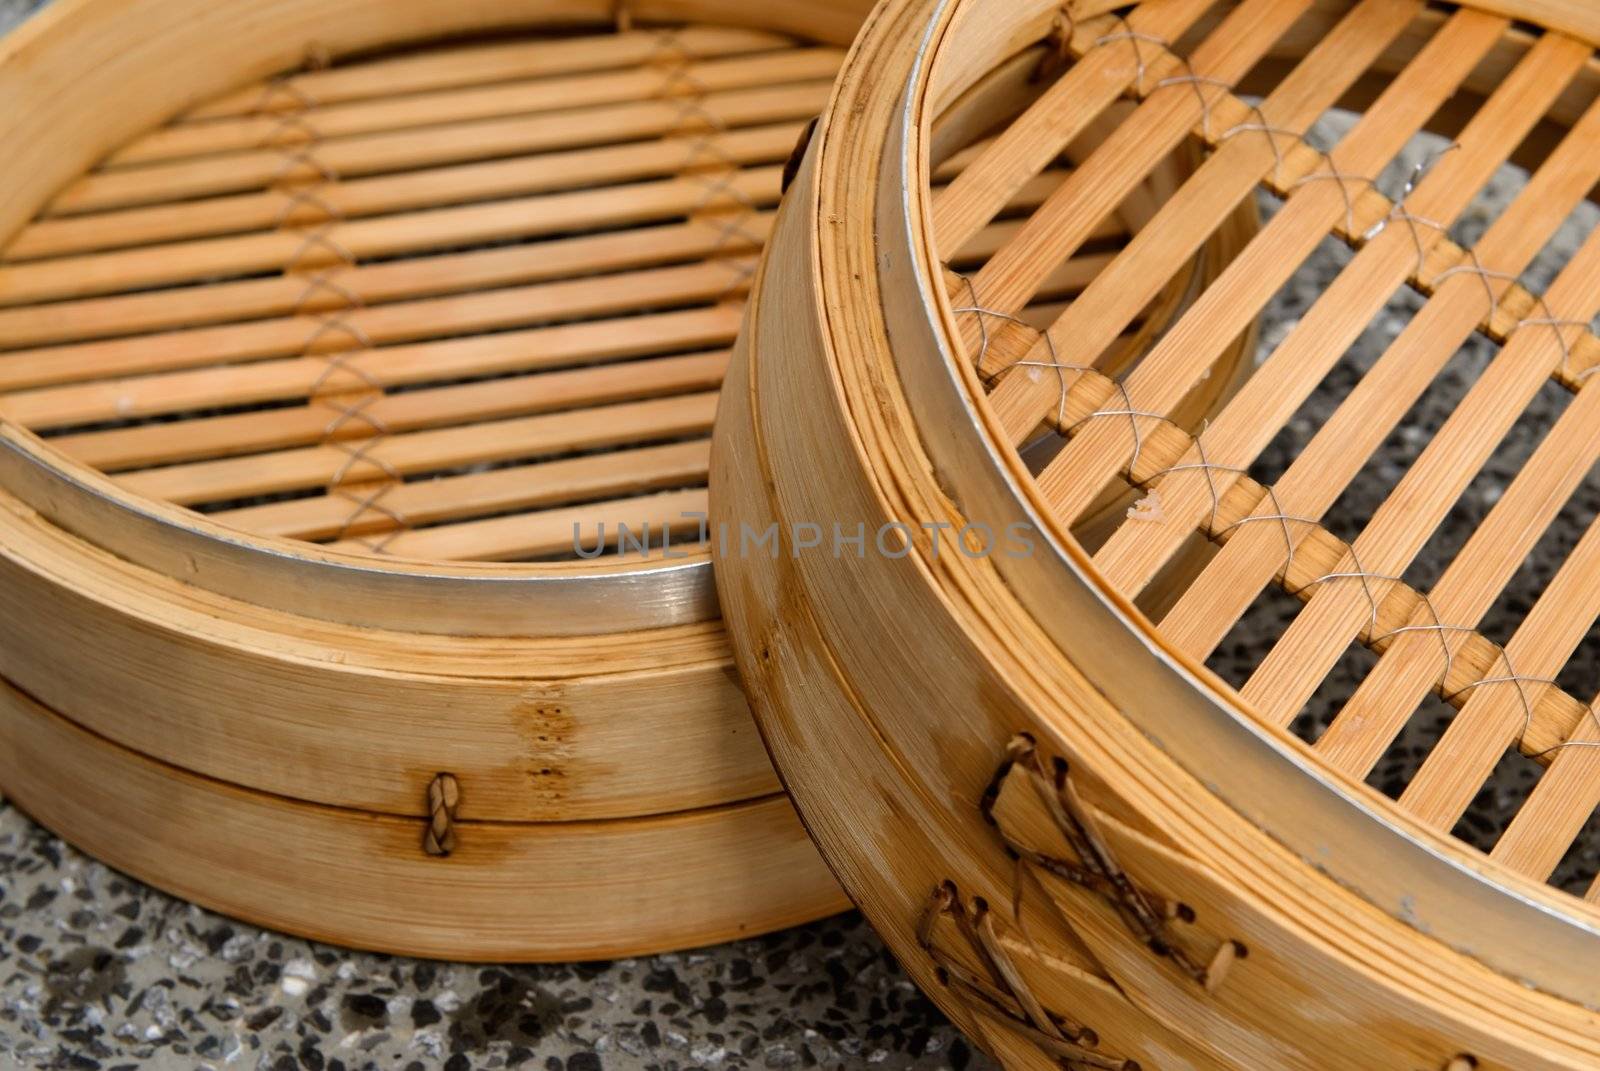 It is a chinese steamer made with bamboo. by elwynn